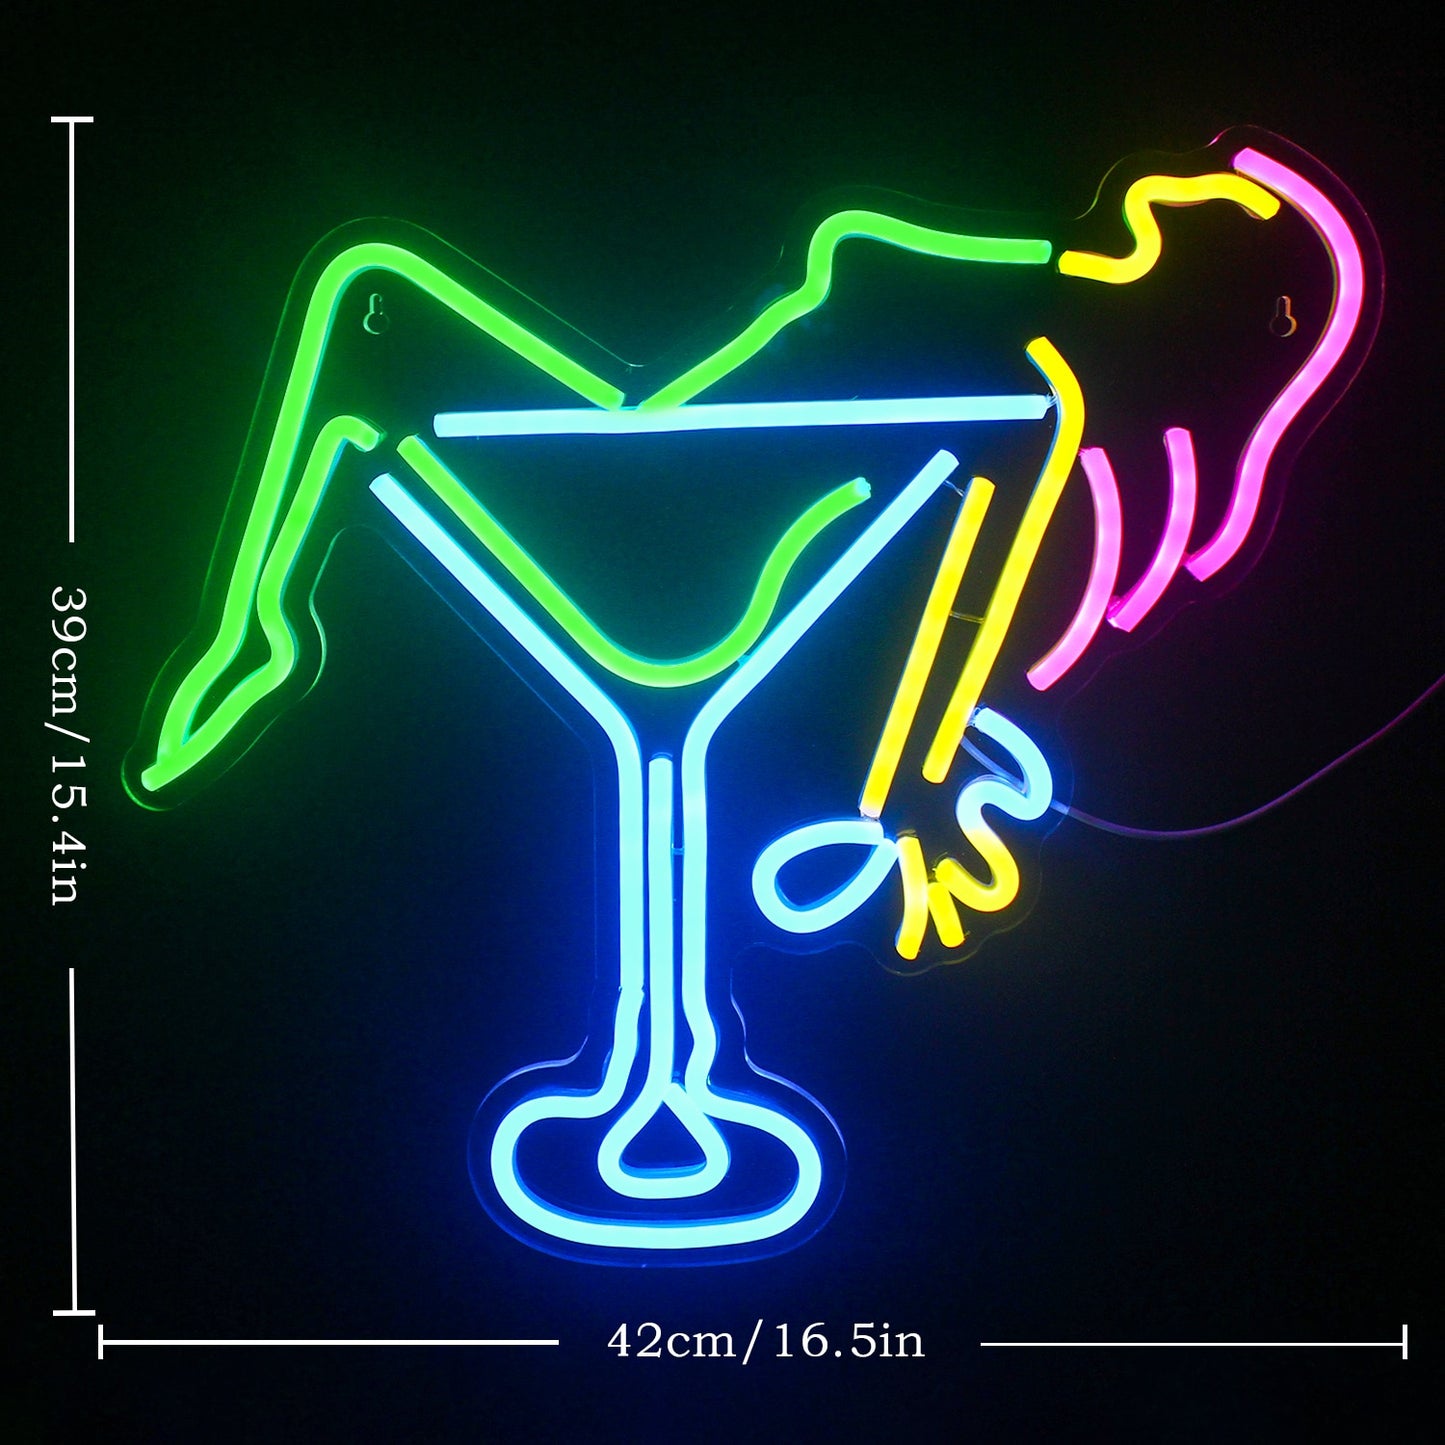 Cocktails & Dreams LED Neon Sign Wall Decor